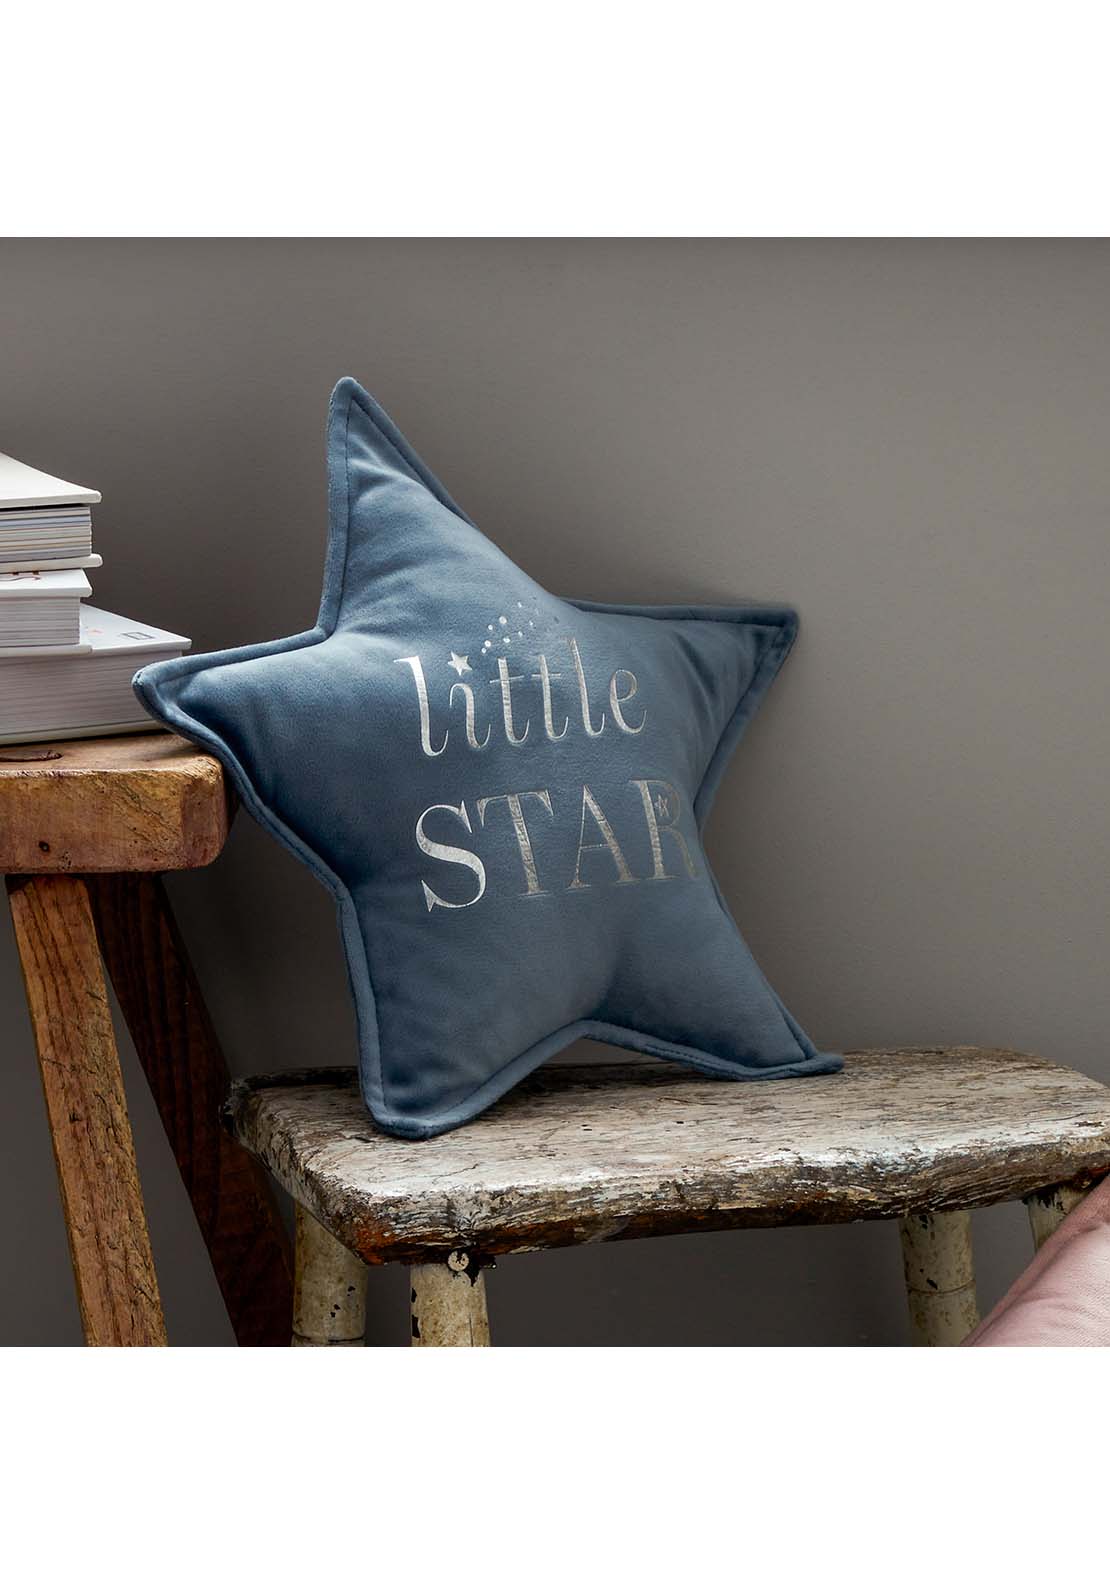 The Home Collection Little Star Velvet Cushion 30cm - Blue 2 Shaws Department Stores